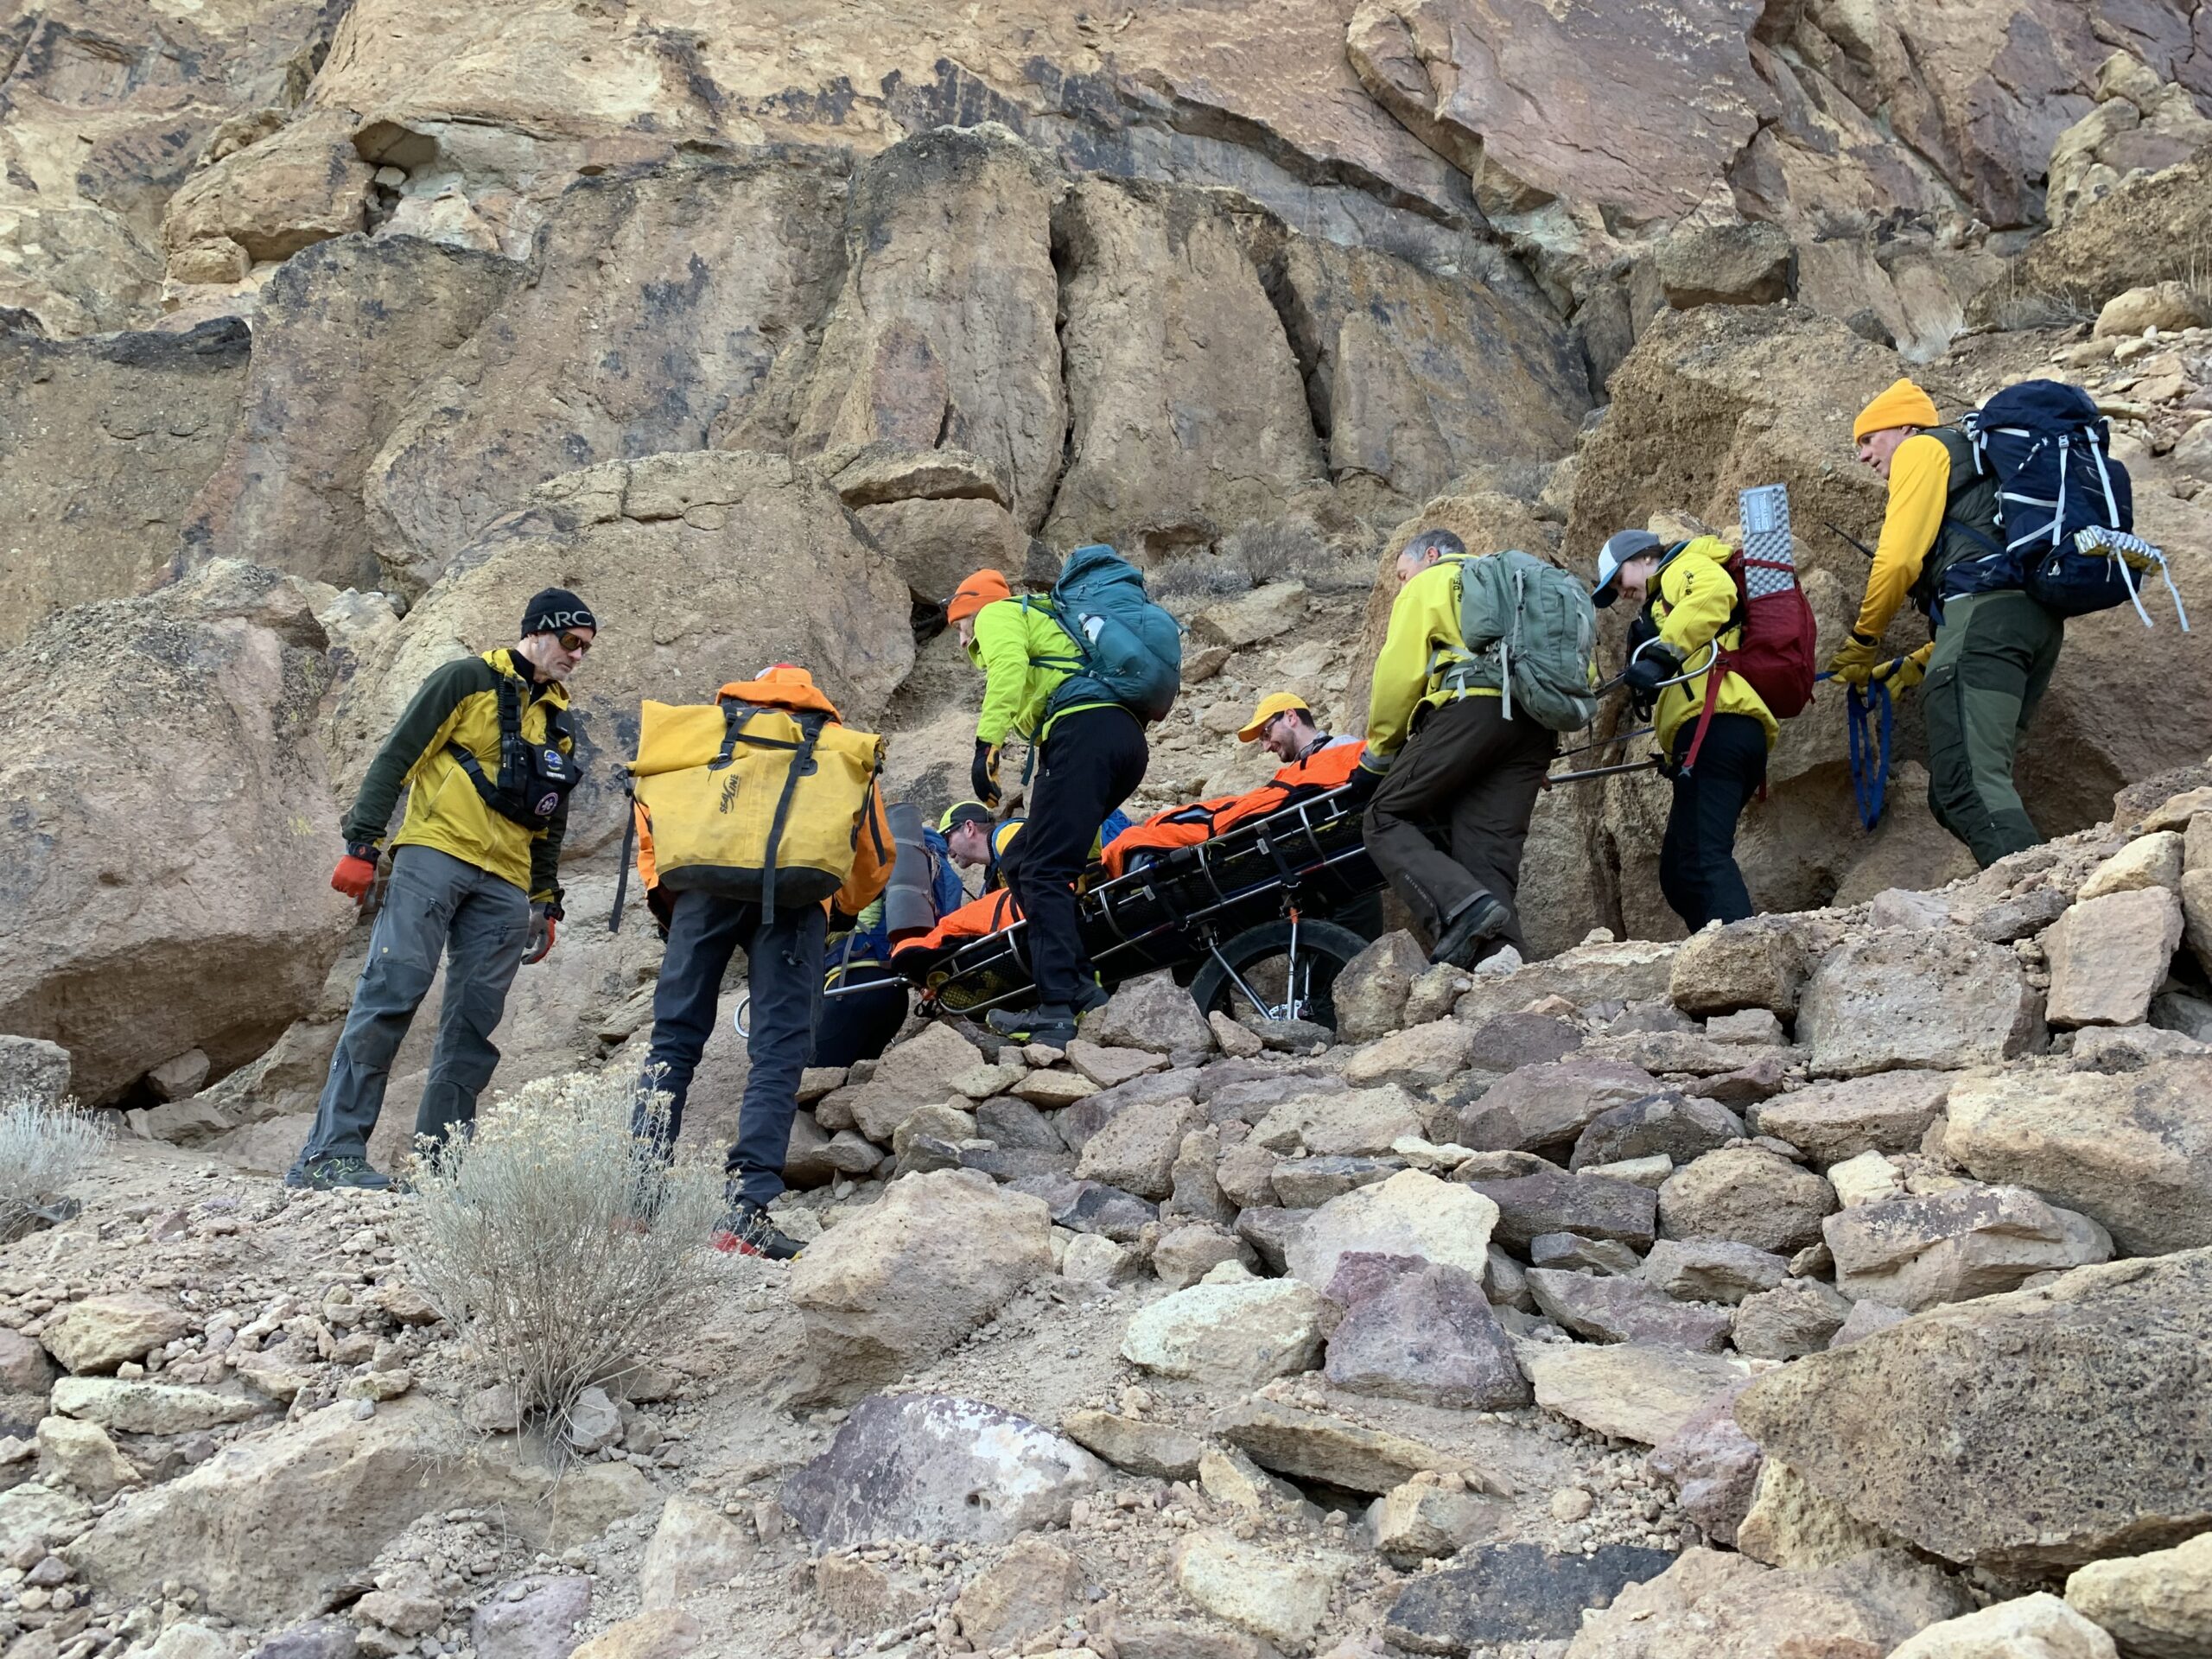 DESCHUTES COUNTY SHERIFF'S OFFICE SEARCH AND RESCUE ASSIST INJURED ...